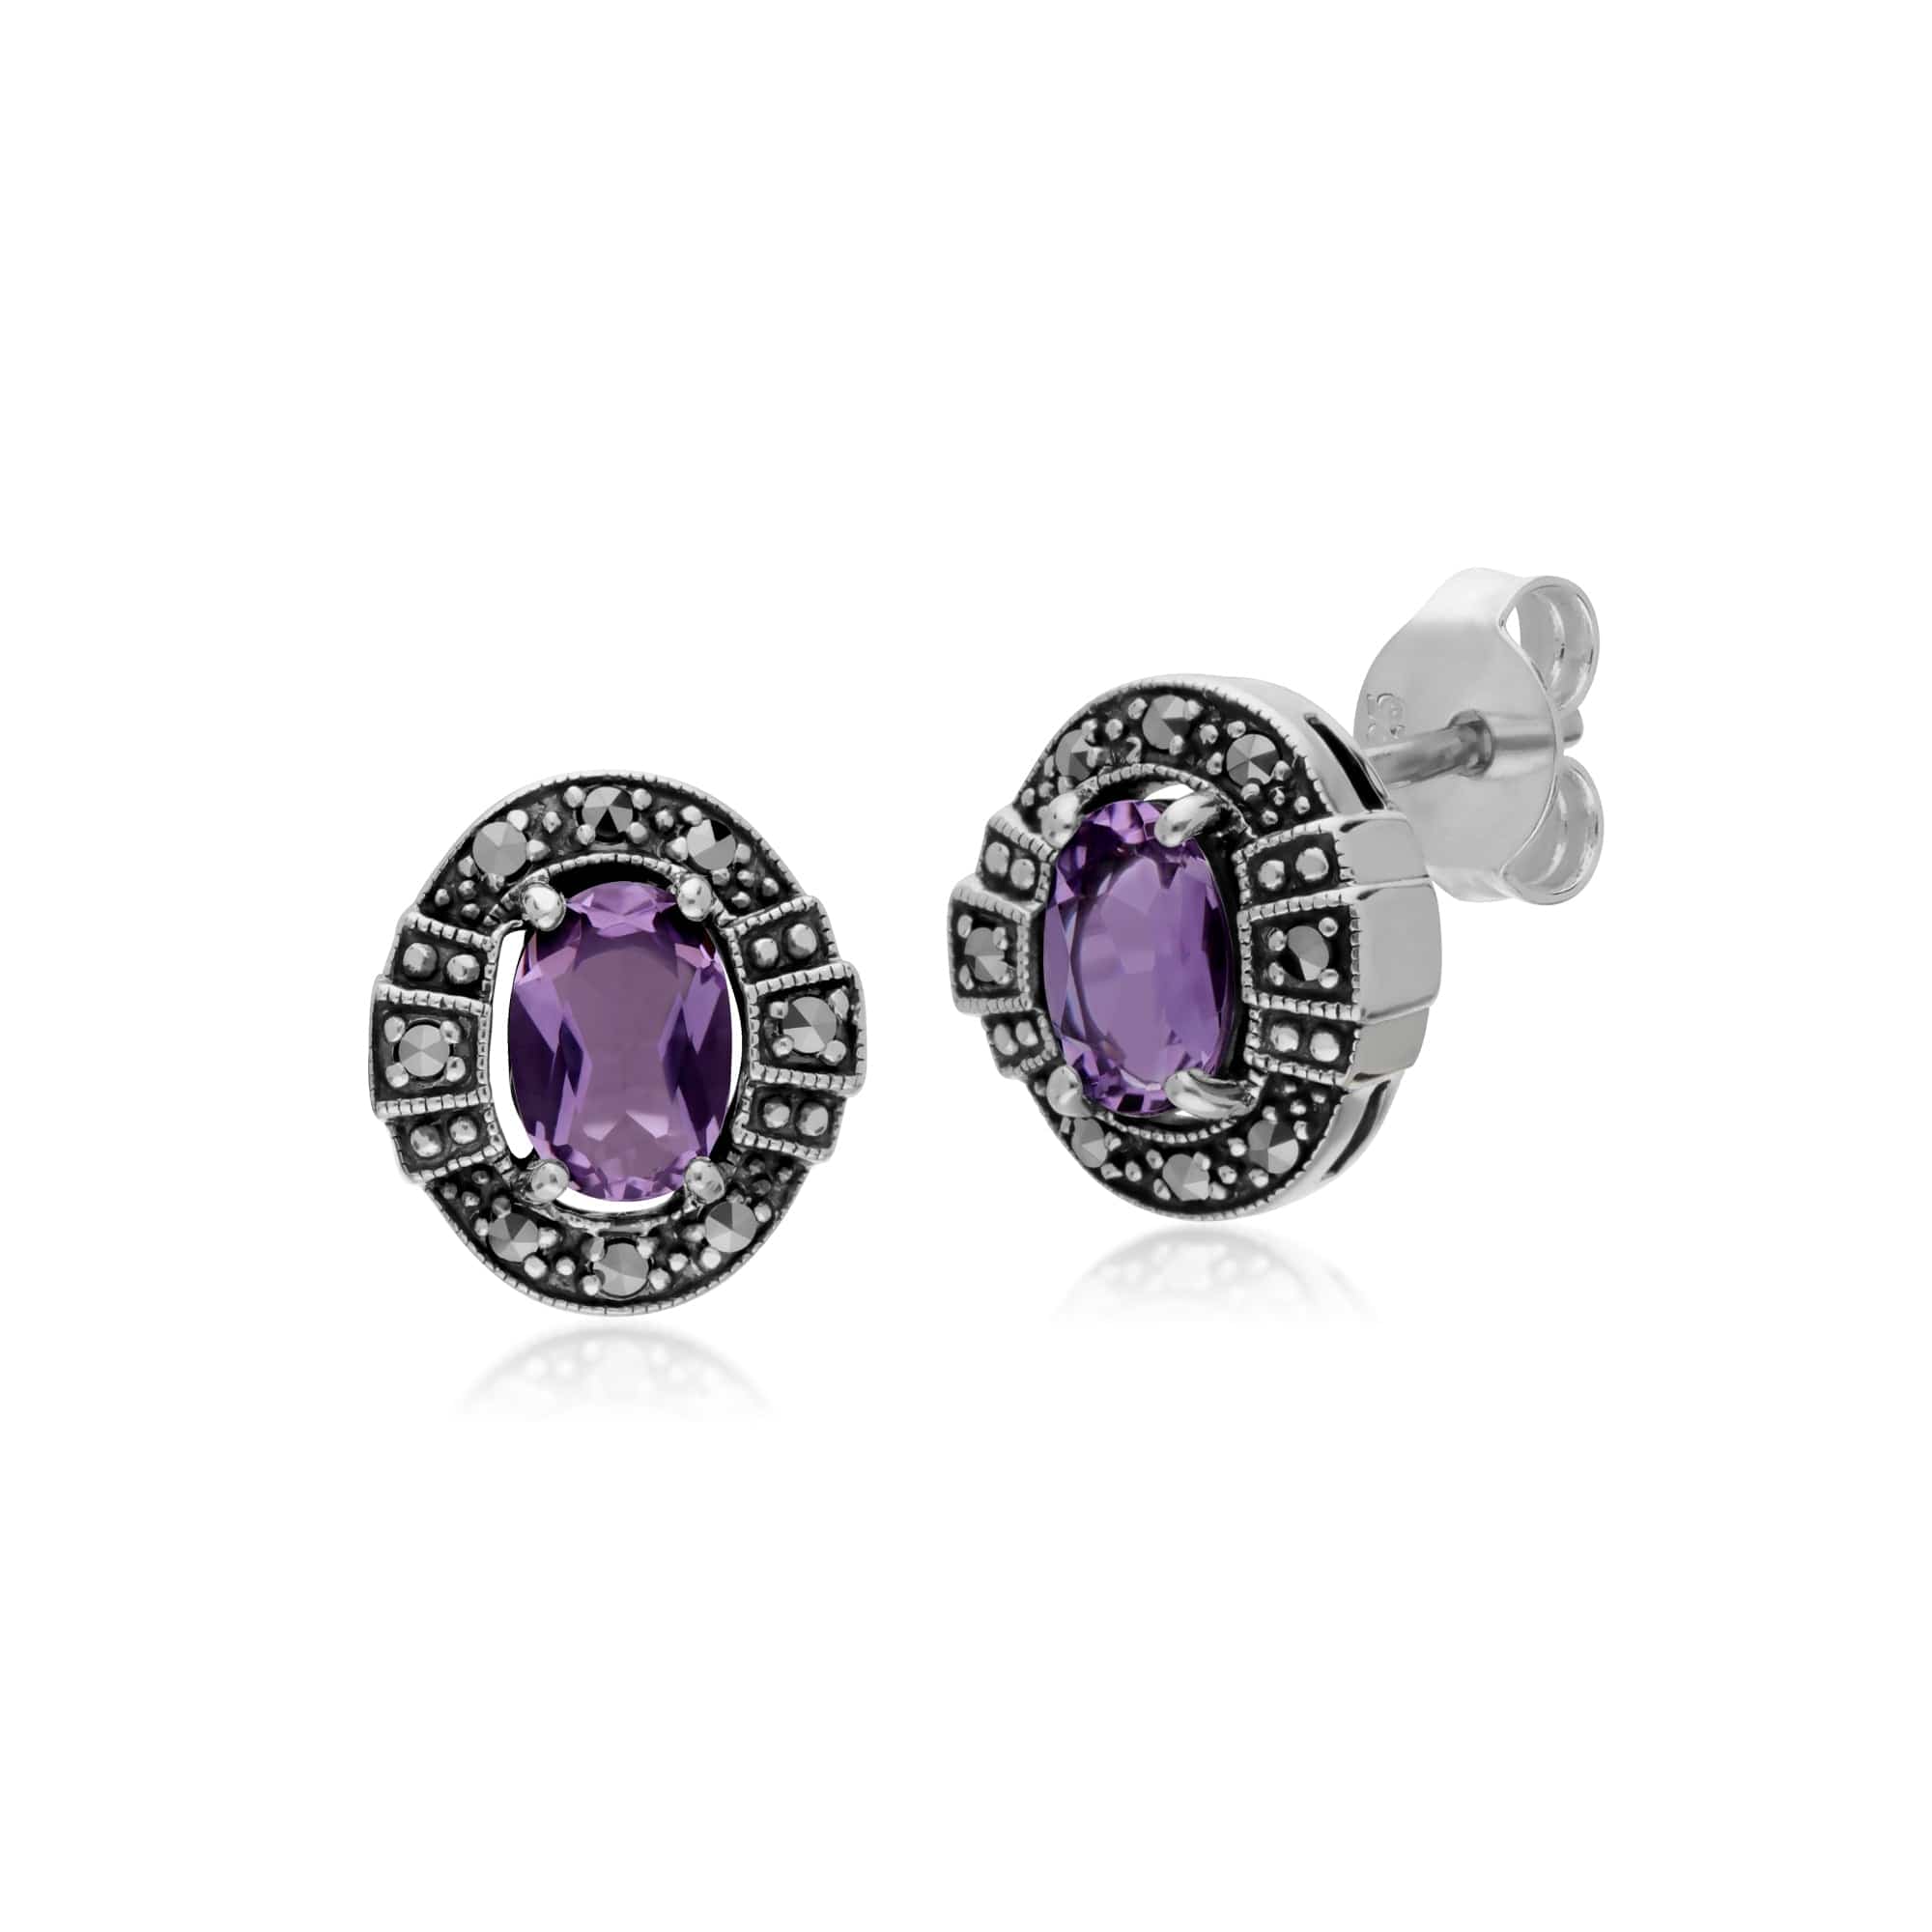 214E873002925-214P303302925 Art Deco Style Oval Amethyst and Marcasite Cluster Stud Earrings & Pendant Set in 925 Sterling Silver 2